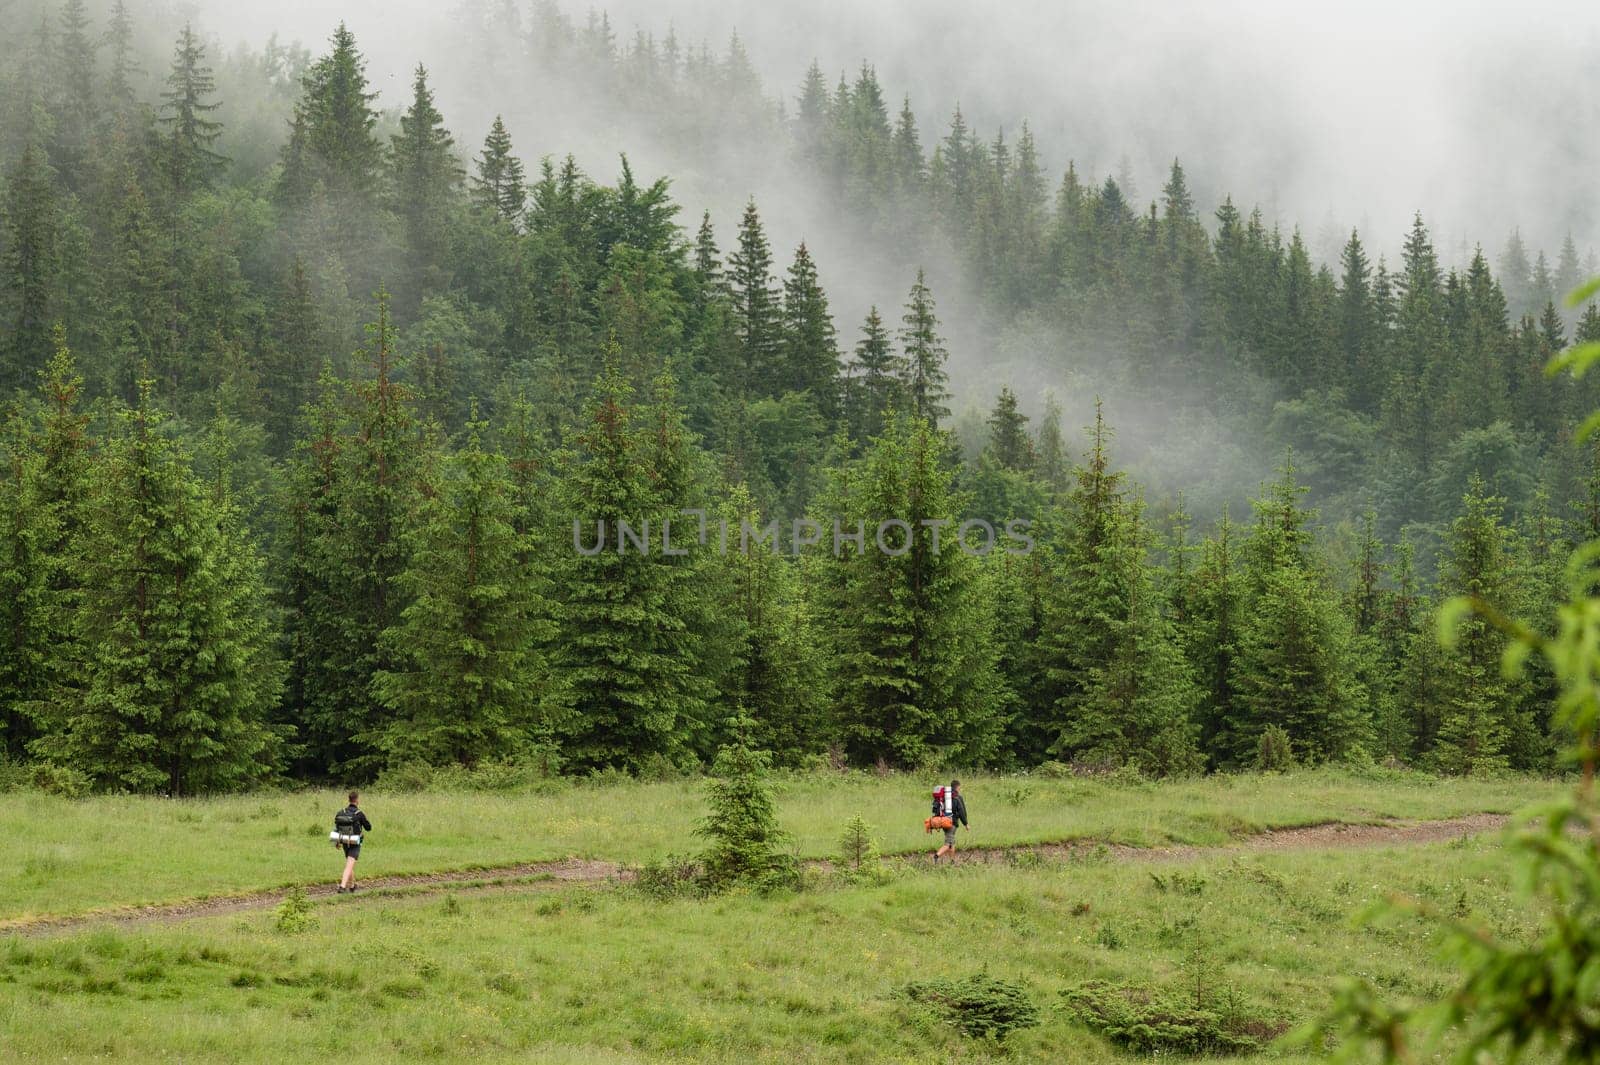 A tourist goes to the mountains in the rain and fog, unfavorable weather in the mountains for tourists.